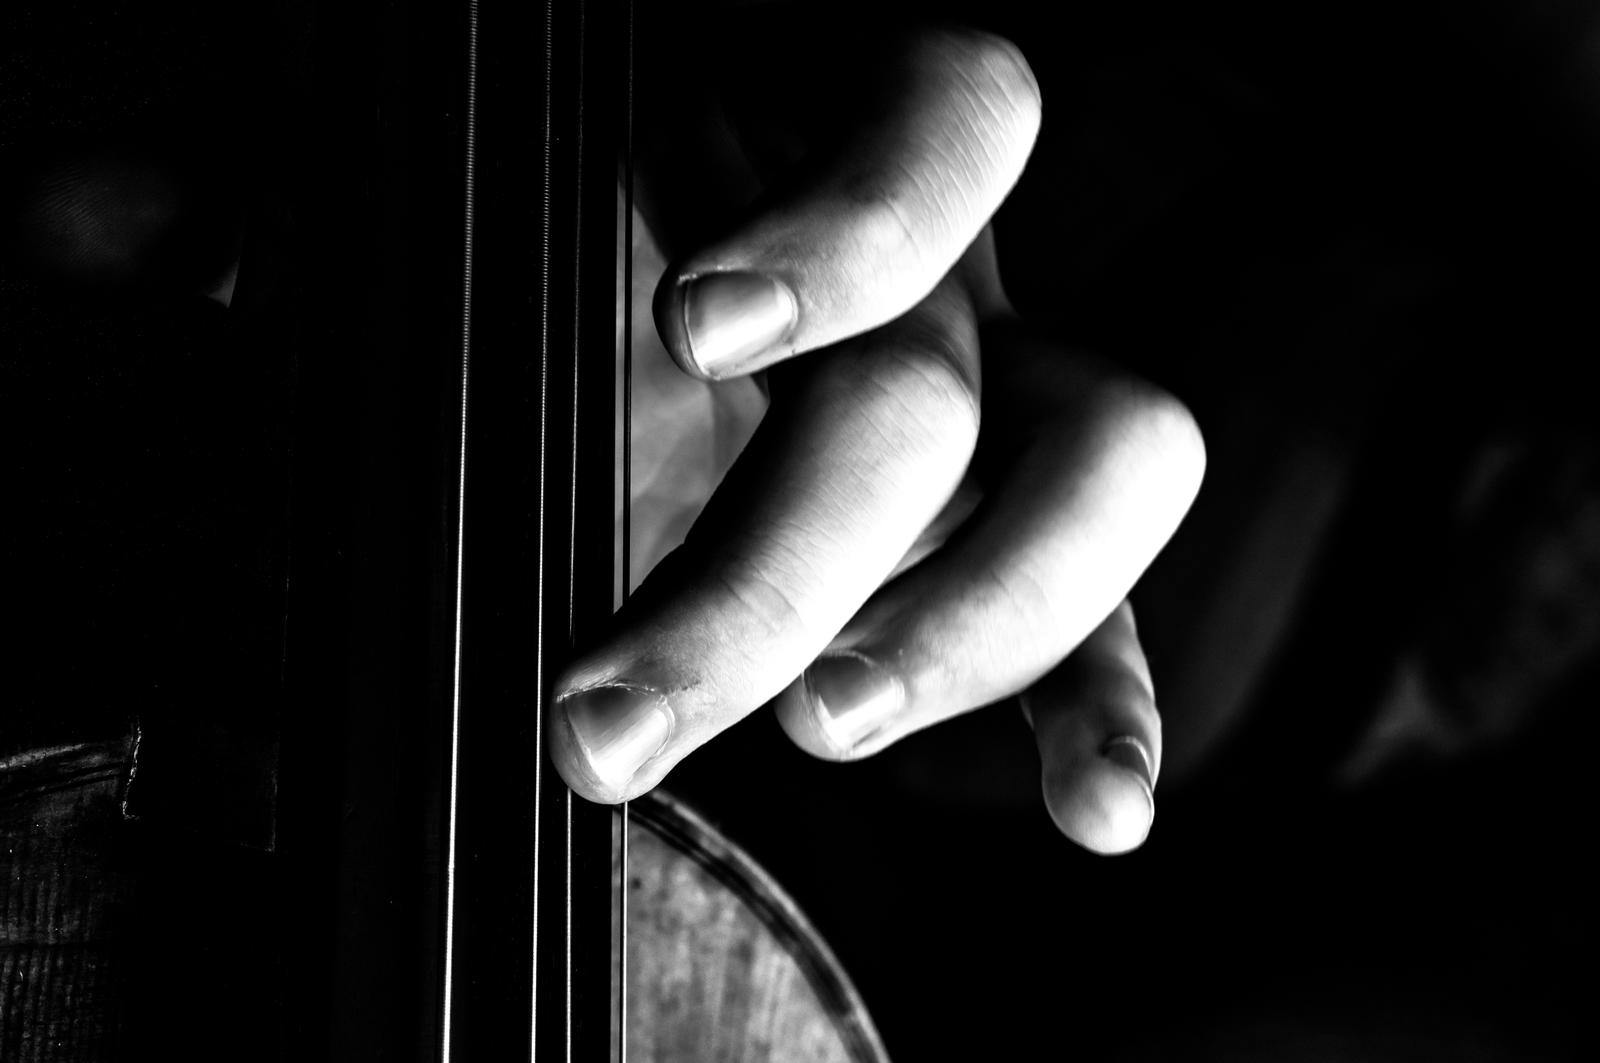 Fingers plucking strings on a musical instrument